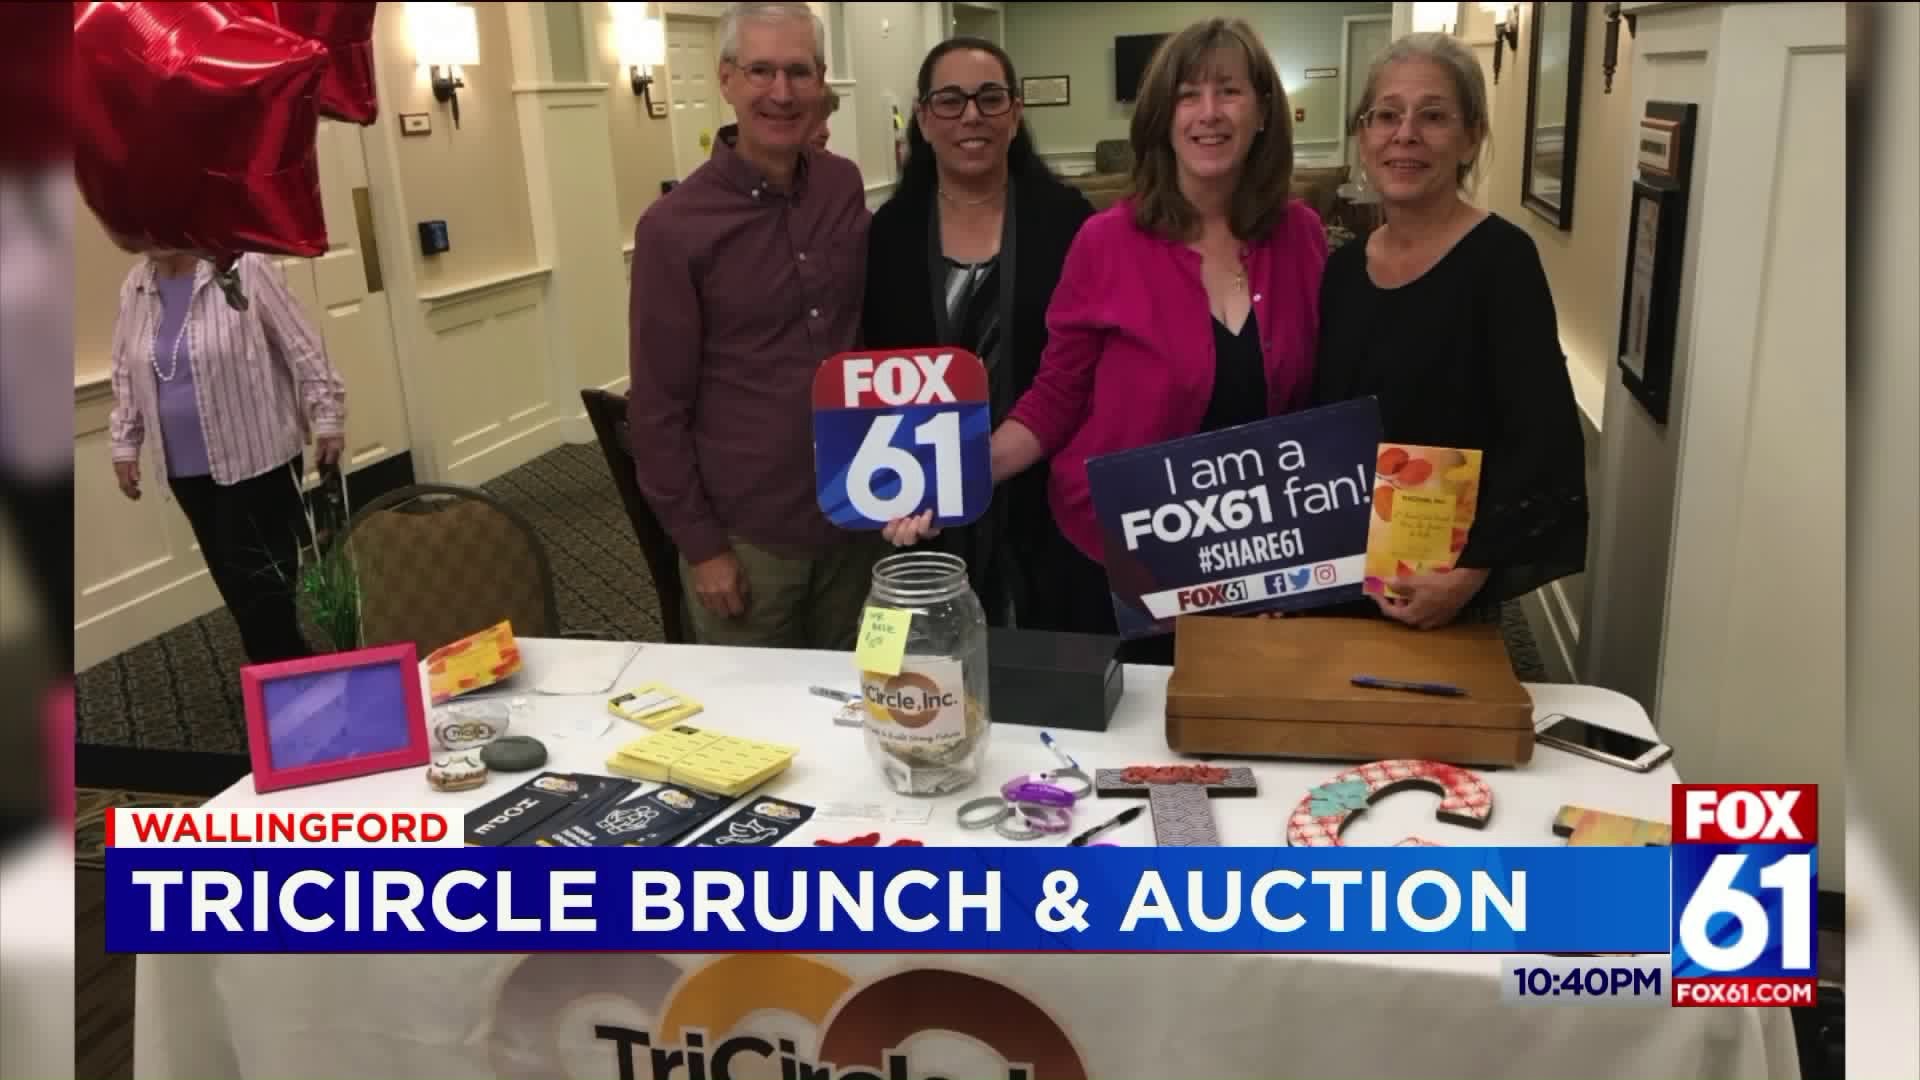 Tricircle brunch and auction